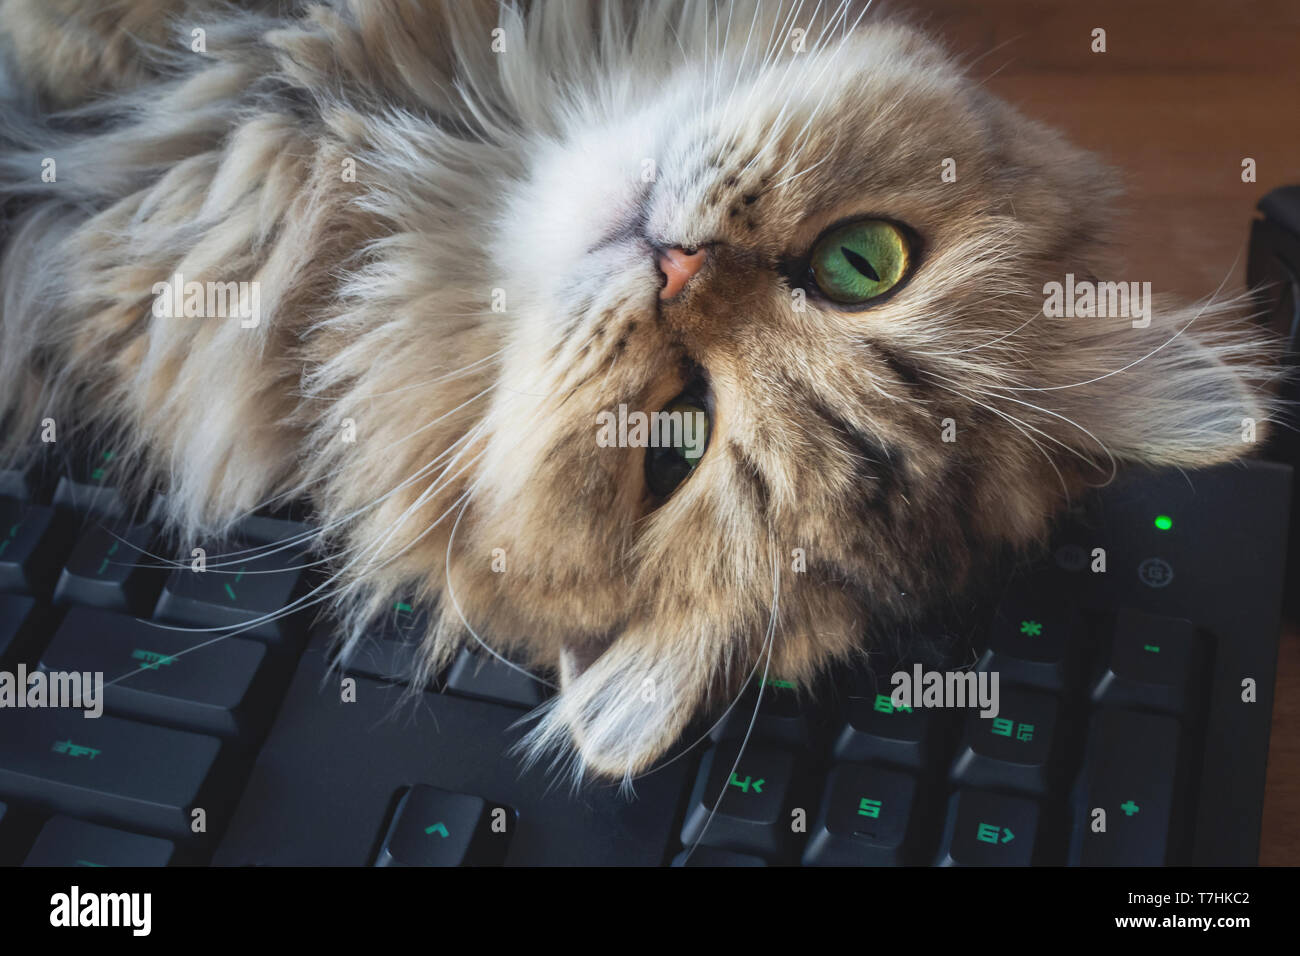 lazy chinchilla persian kitten cat sleep over black computer keyboard on wooden working table at home office on monday morning. Stock Photo